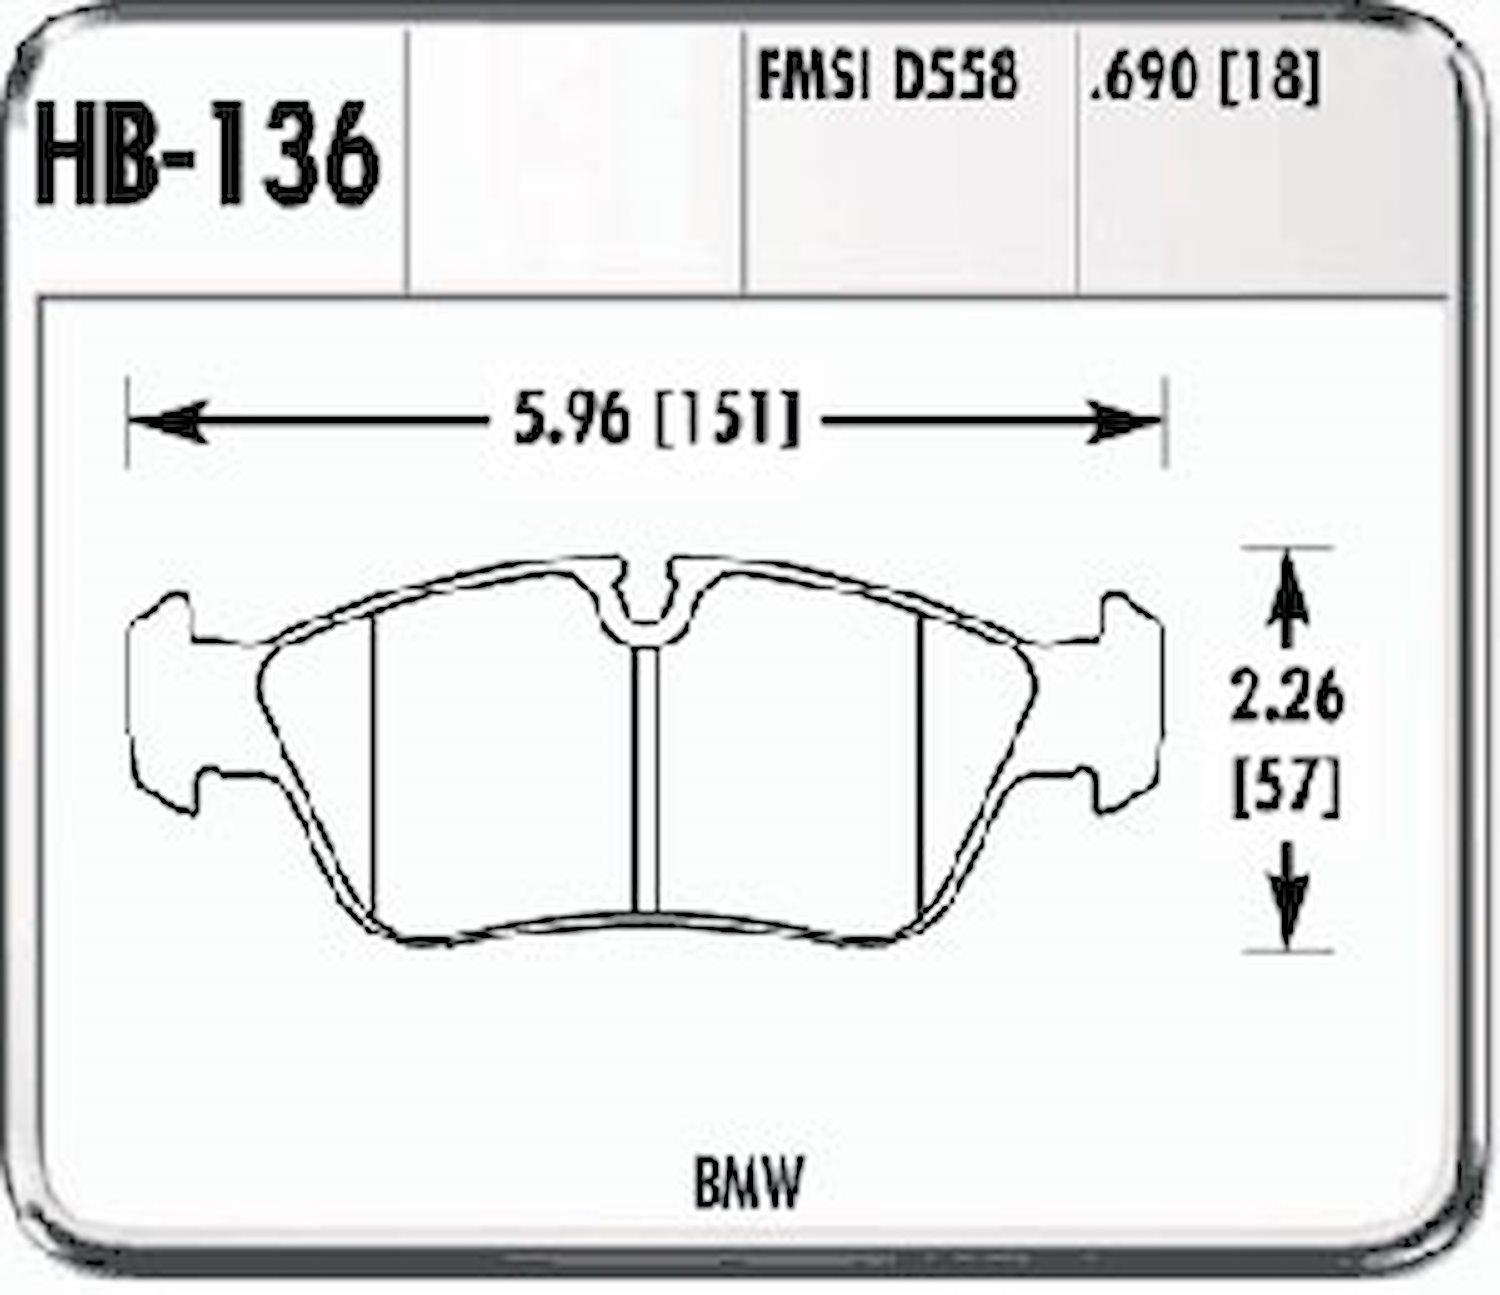 Hawk High Performance Front Brake Pads Fits: 11/91-98 318 i/is